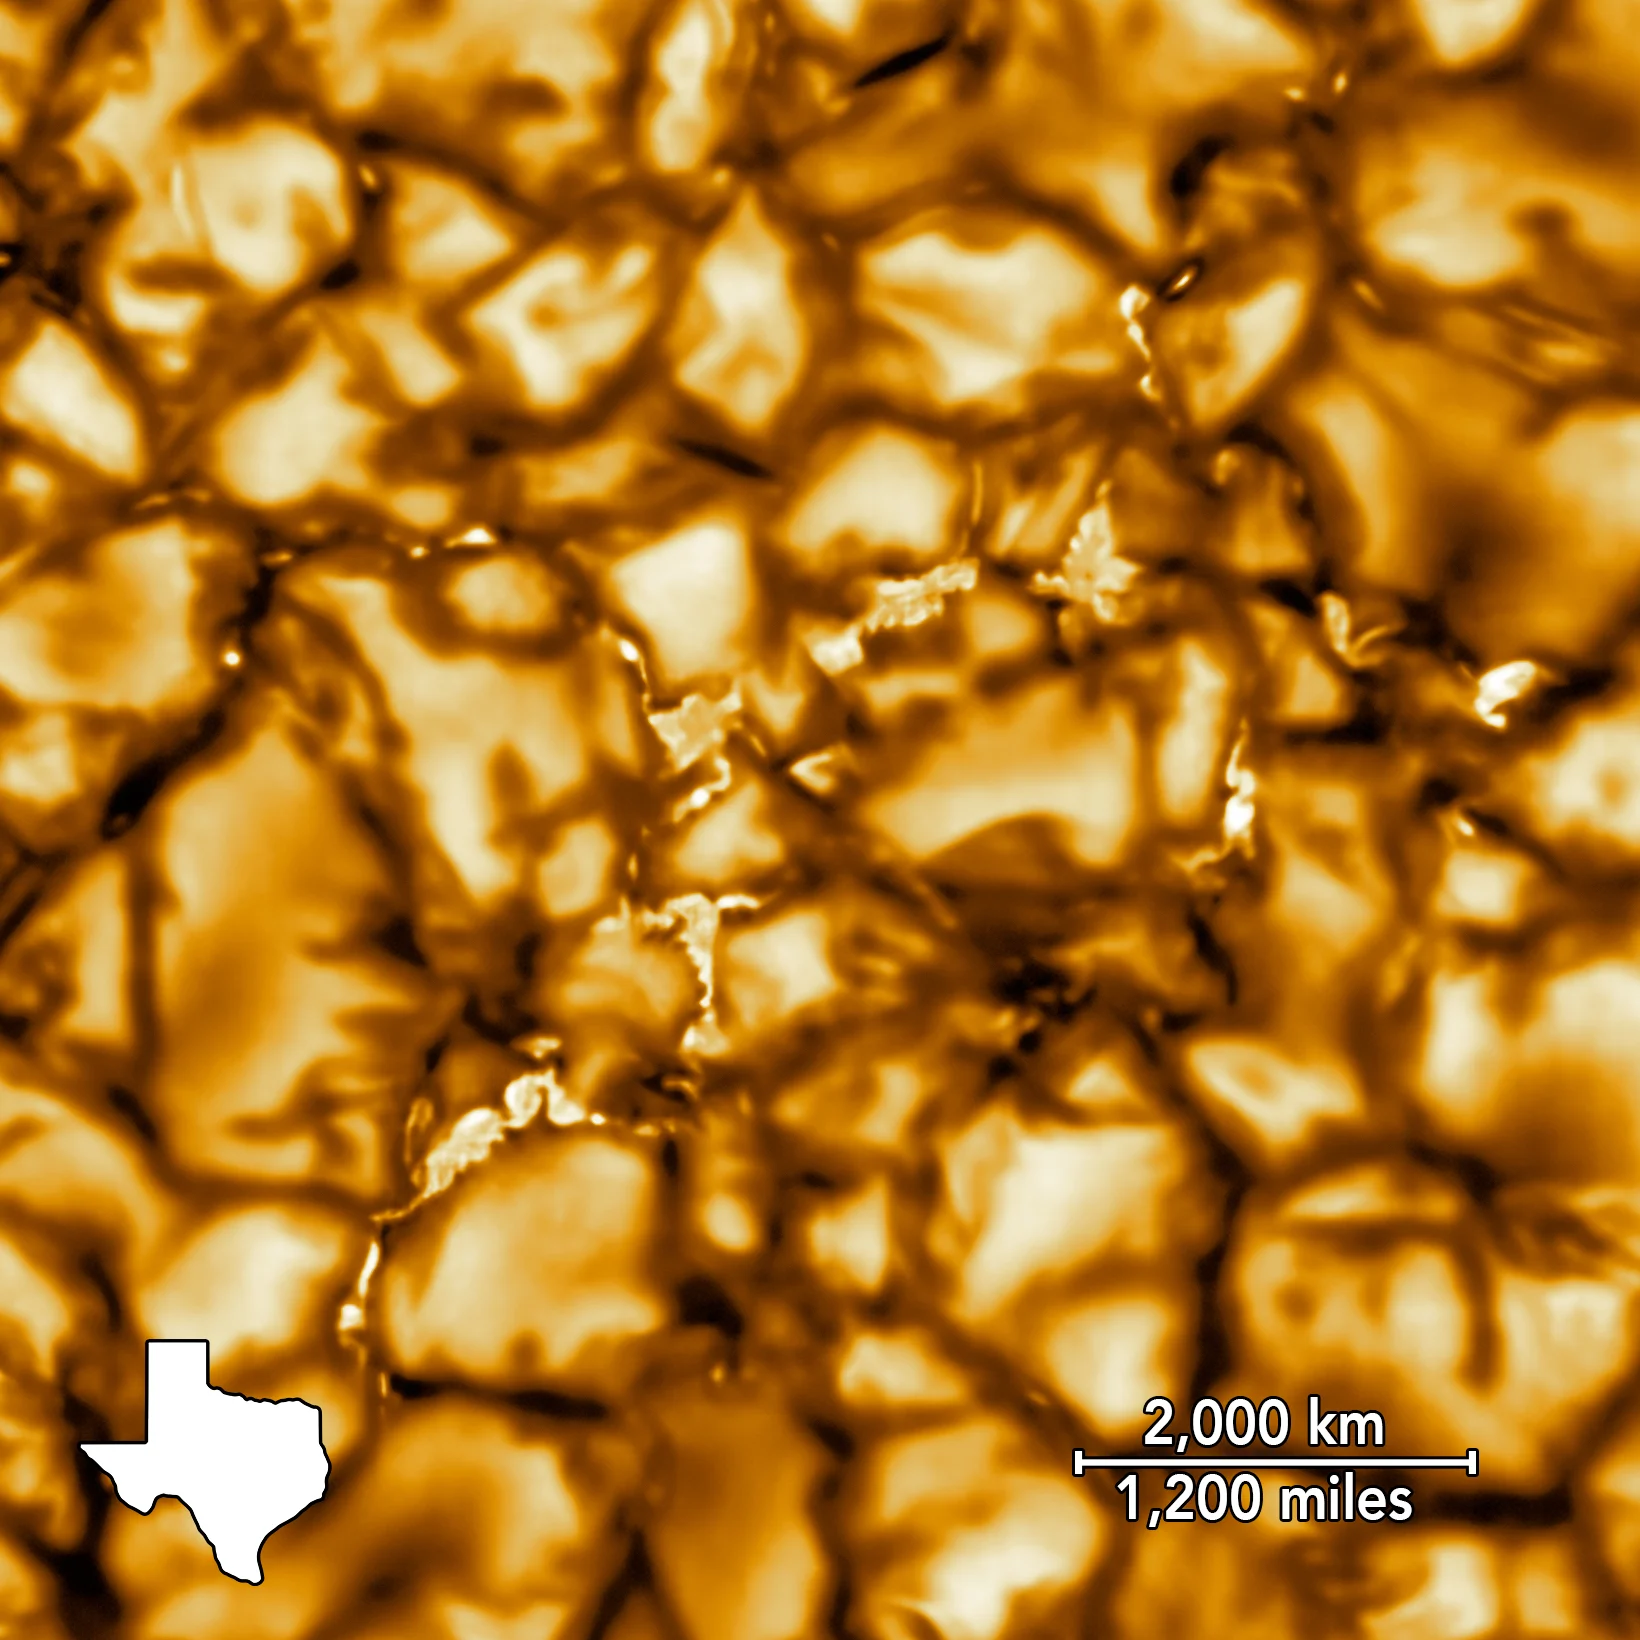 DKIST crop of the image with scalebar texas high res